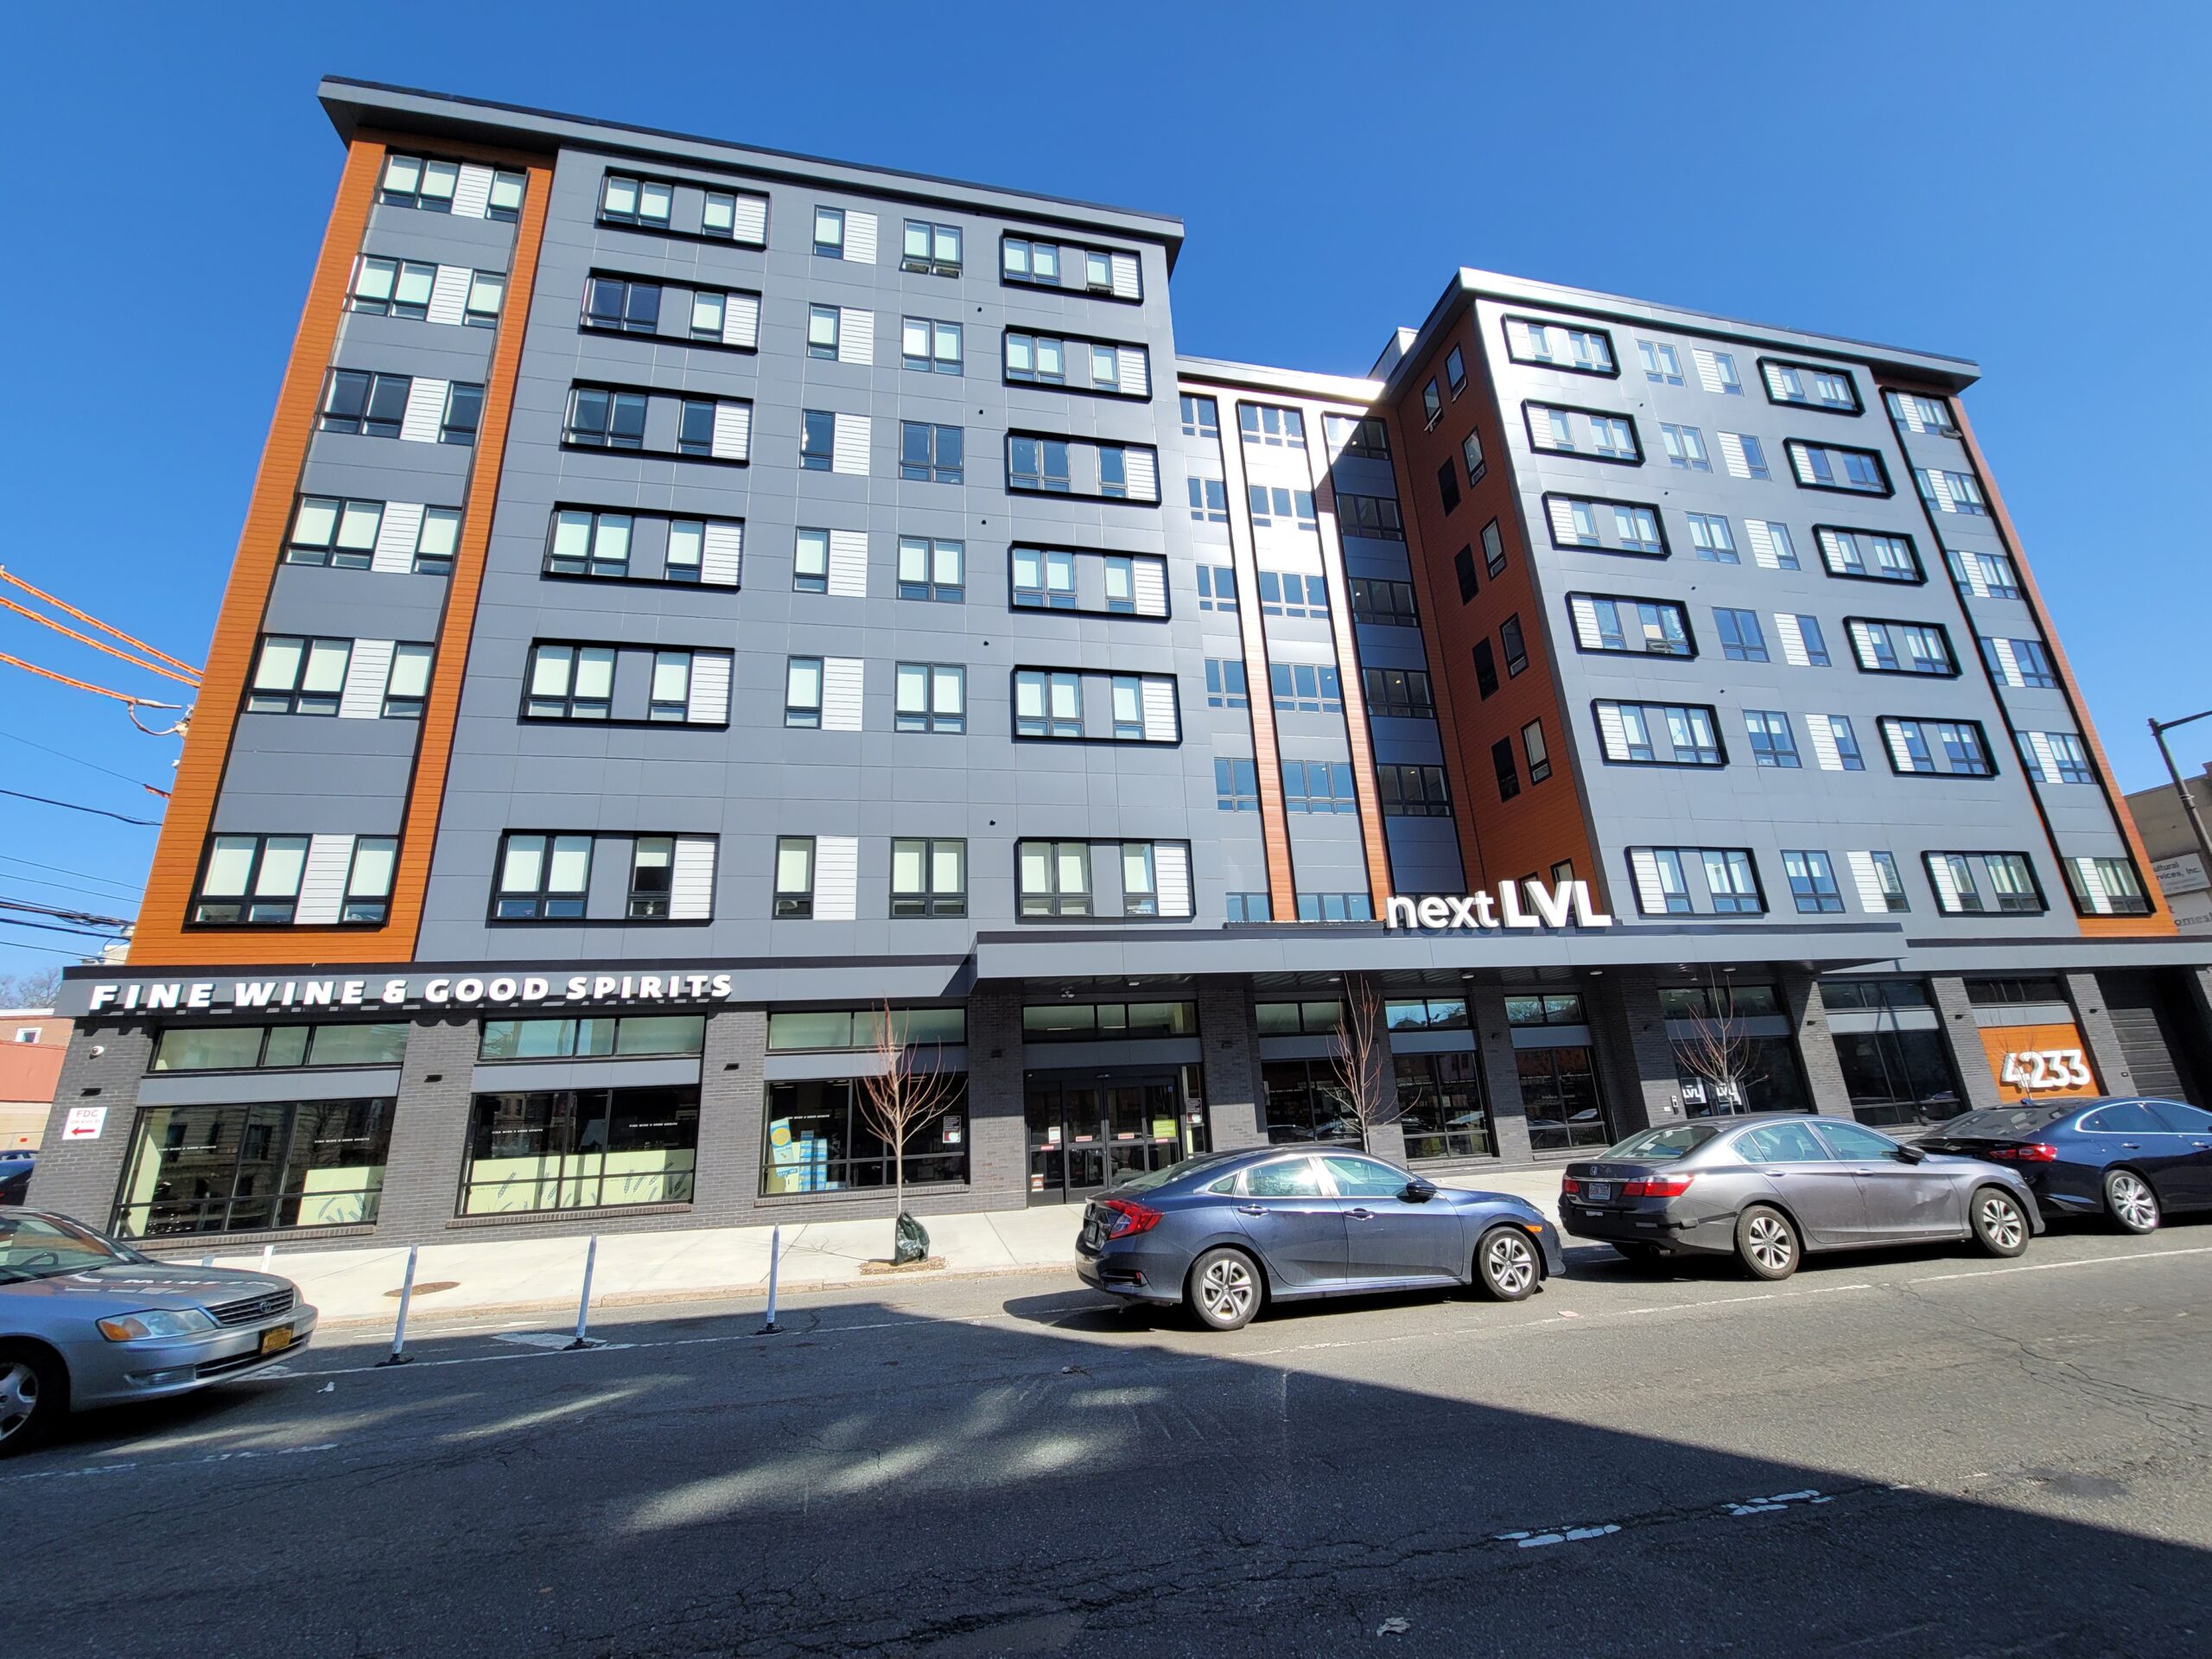 SOLO on Chestnut, formerly known as LVL and Next LVL Apartments